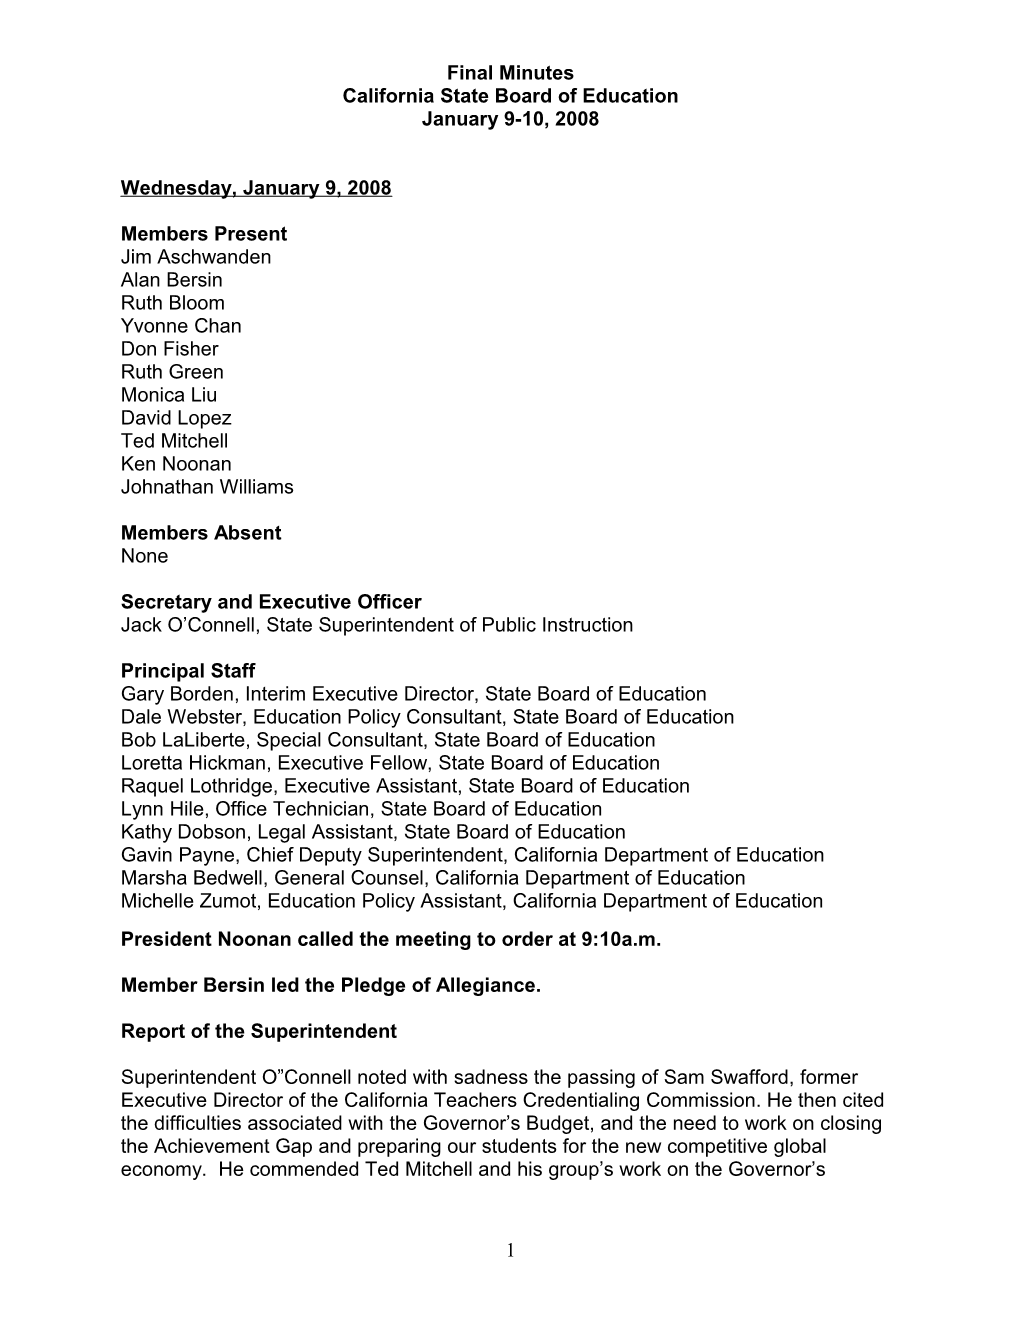 Final Minutes January 9-10, 2008 - SBE Minutes (CA State Board of Education)